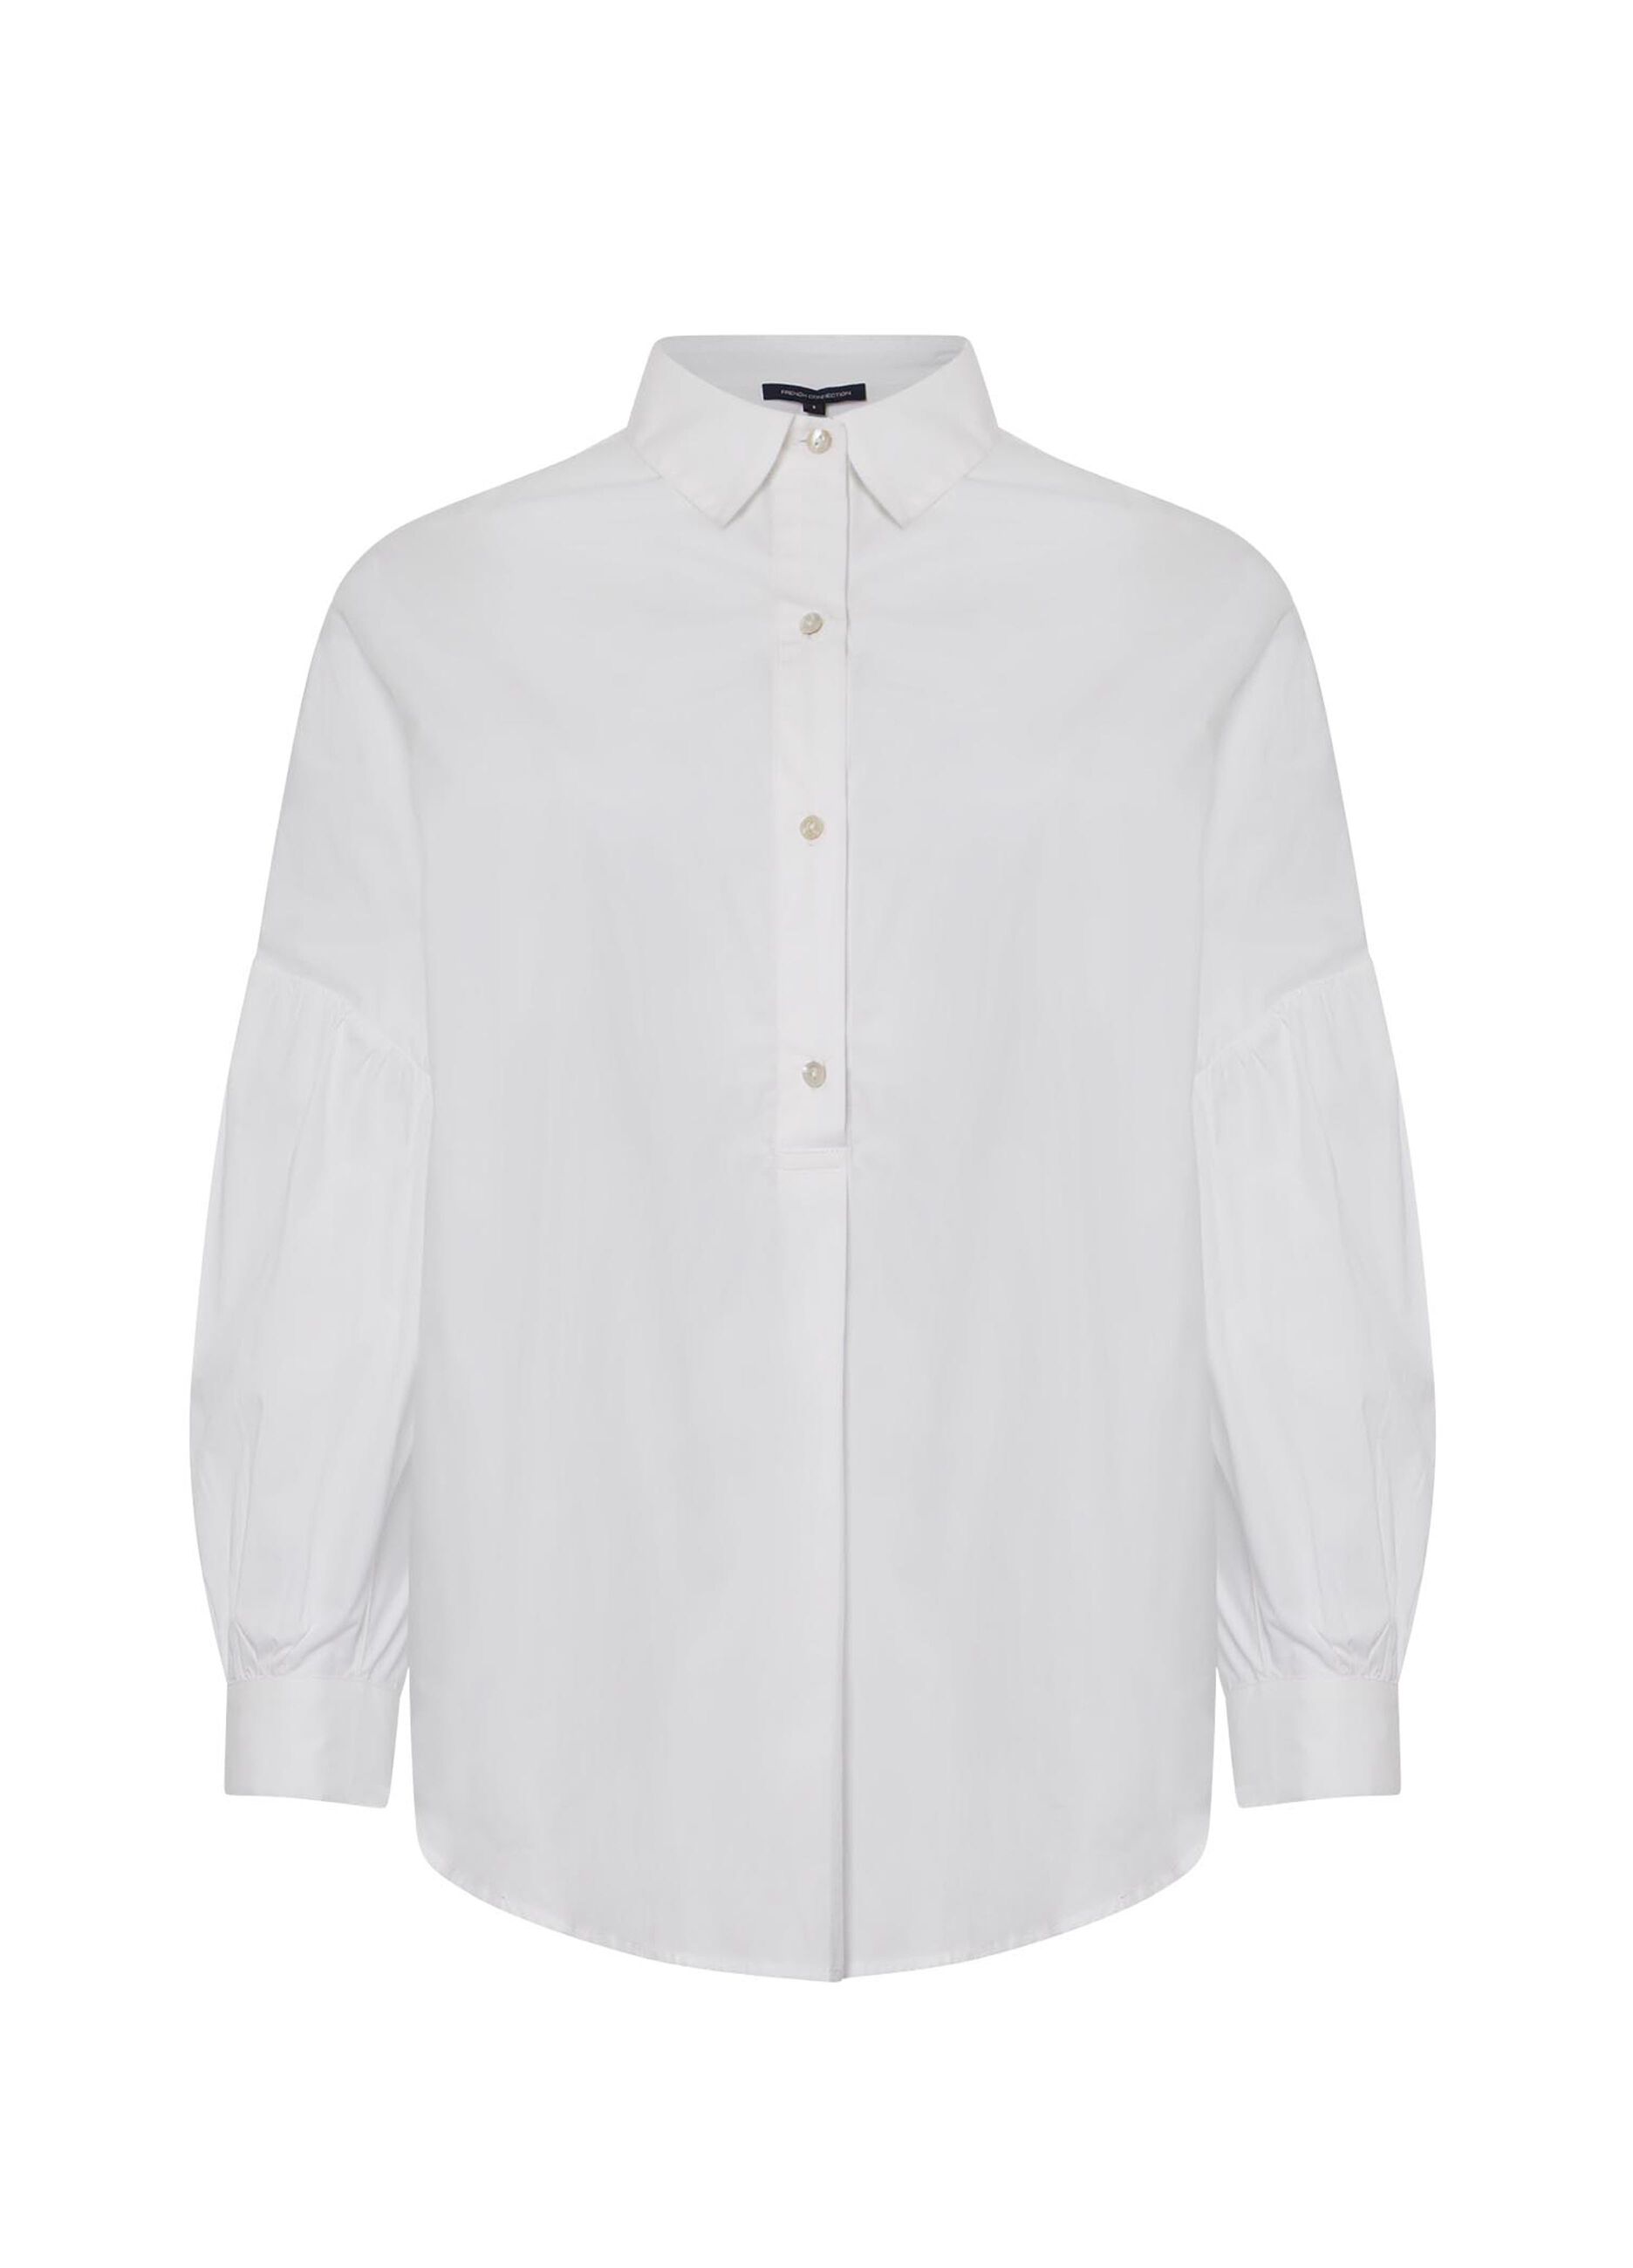 French Connection oversized shirt in cotton.